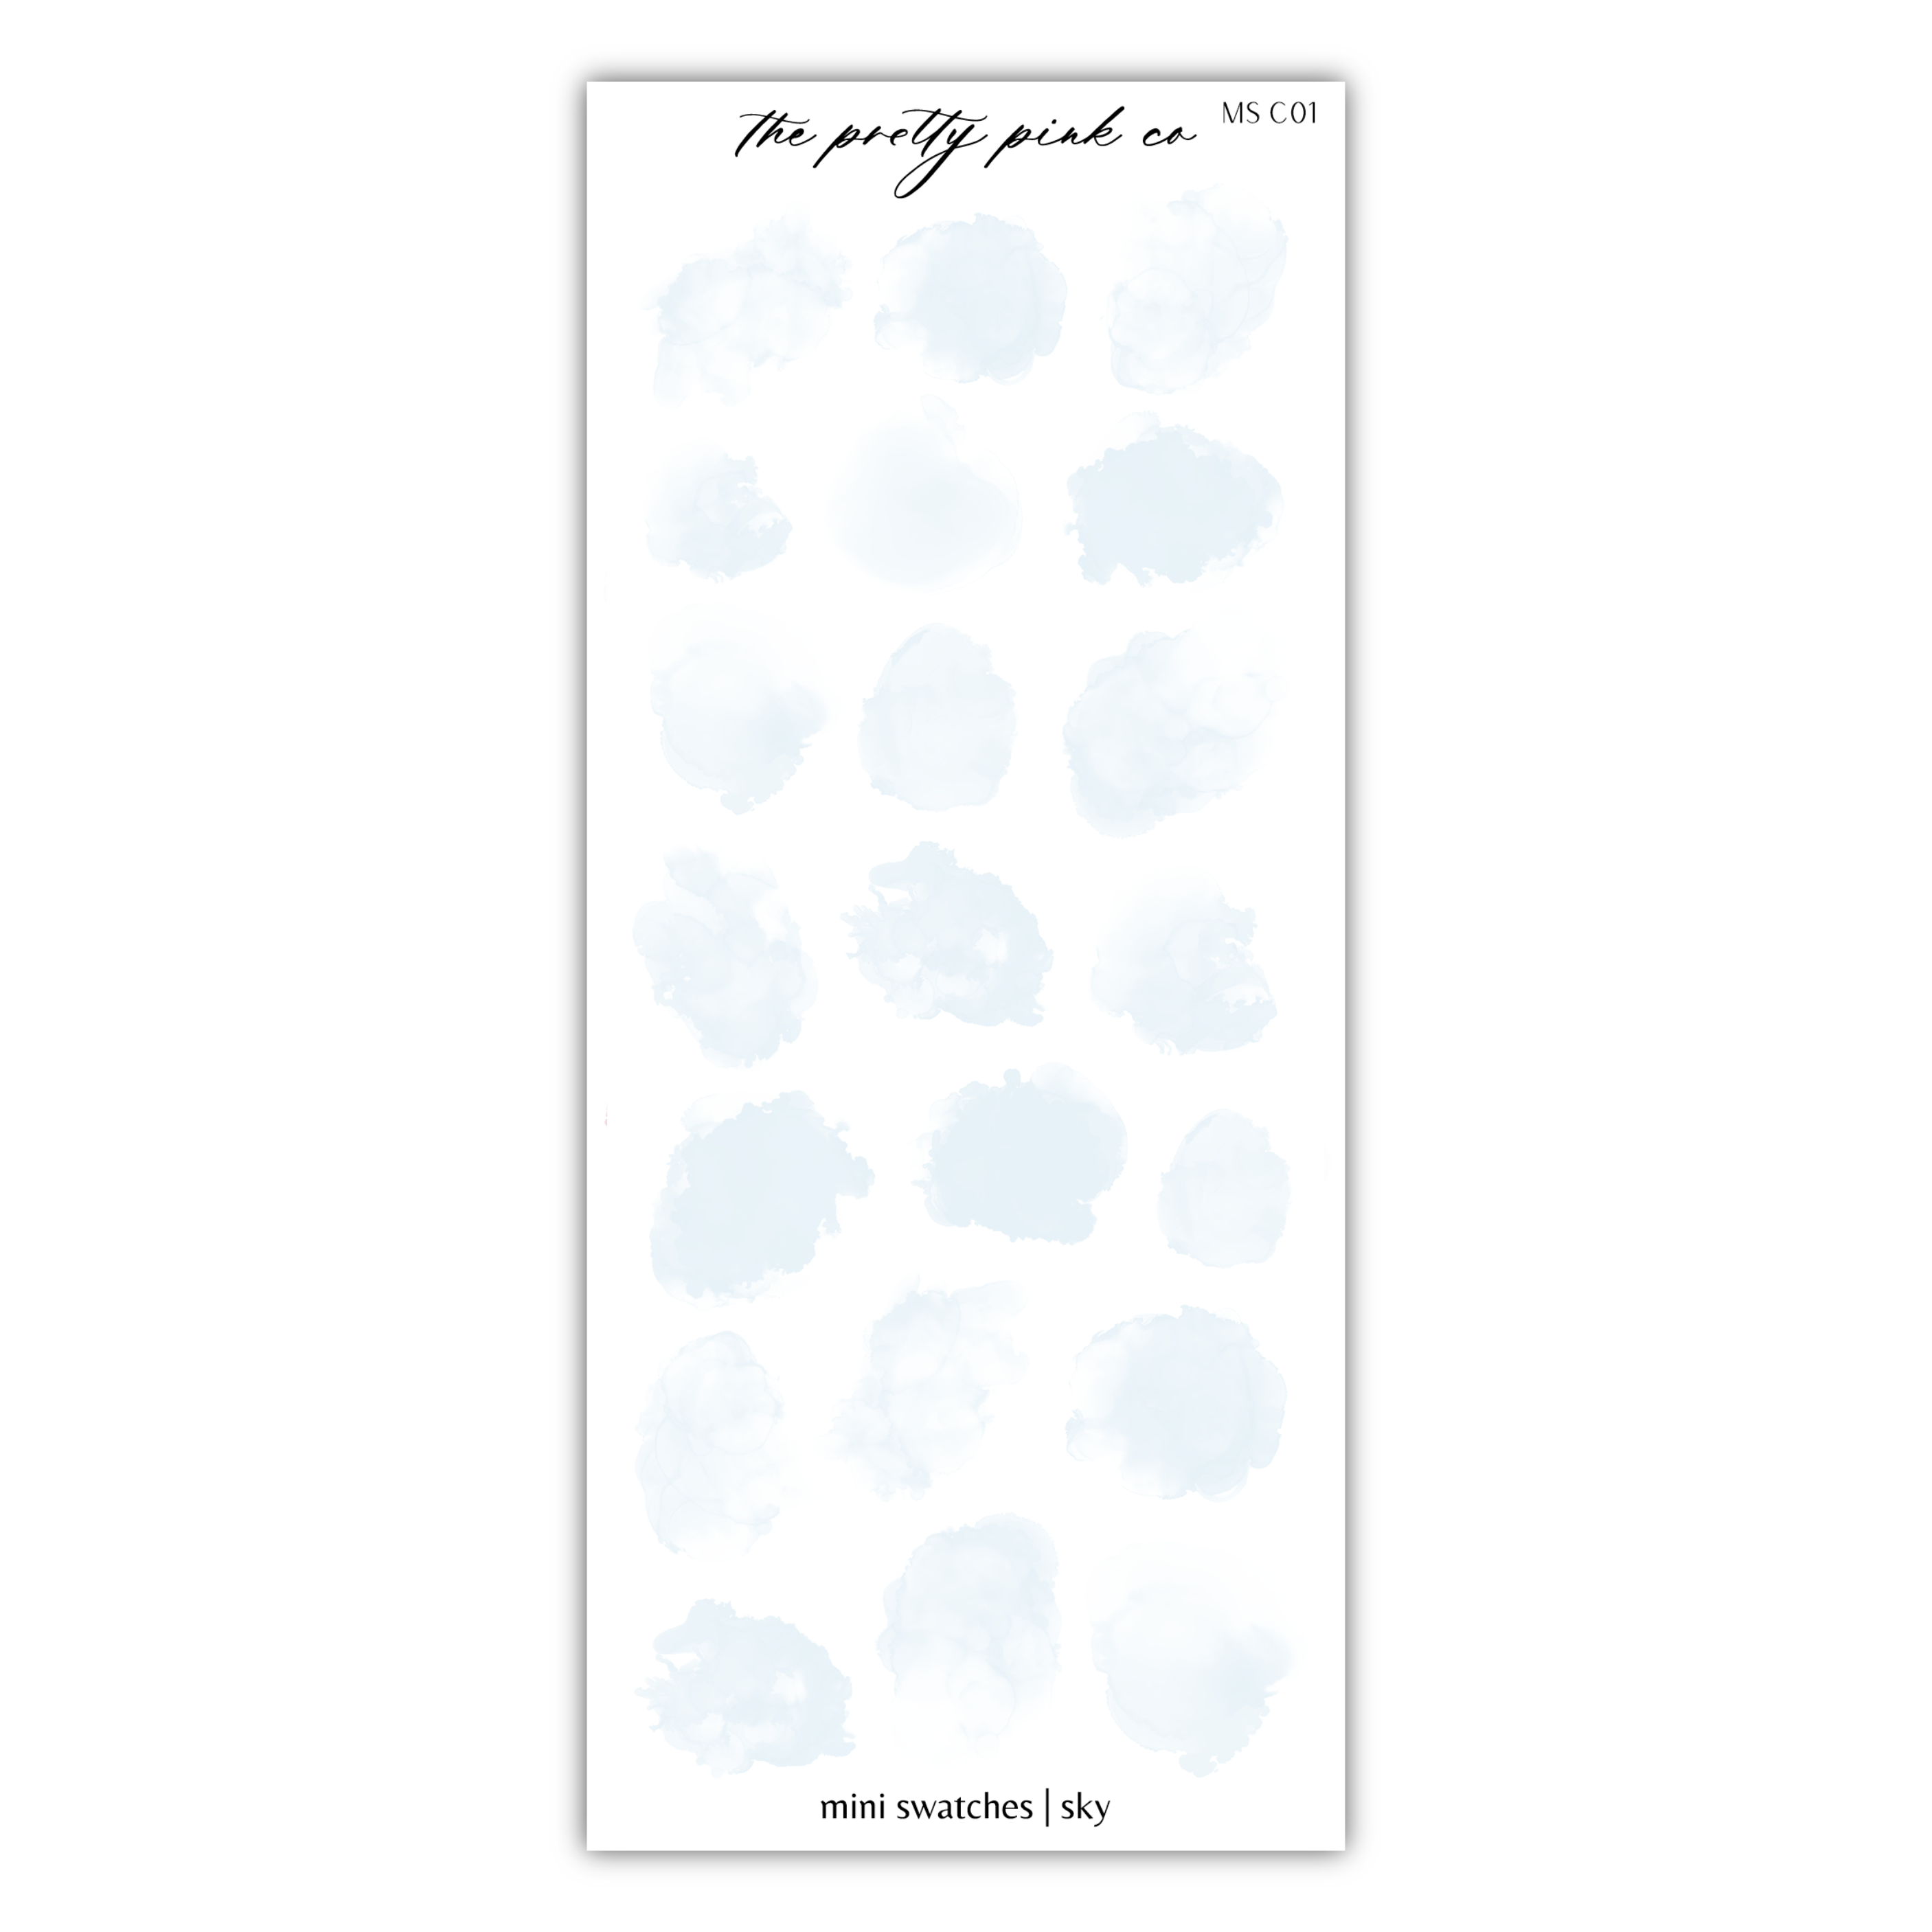 a white and blue watercolor spot pattern on a white background